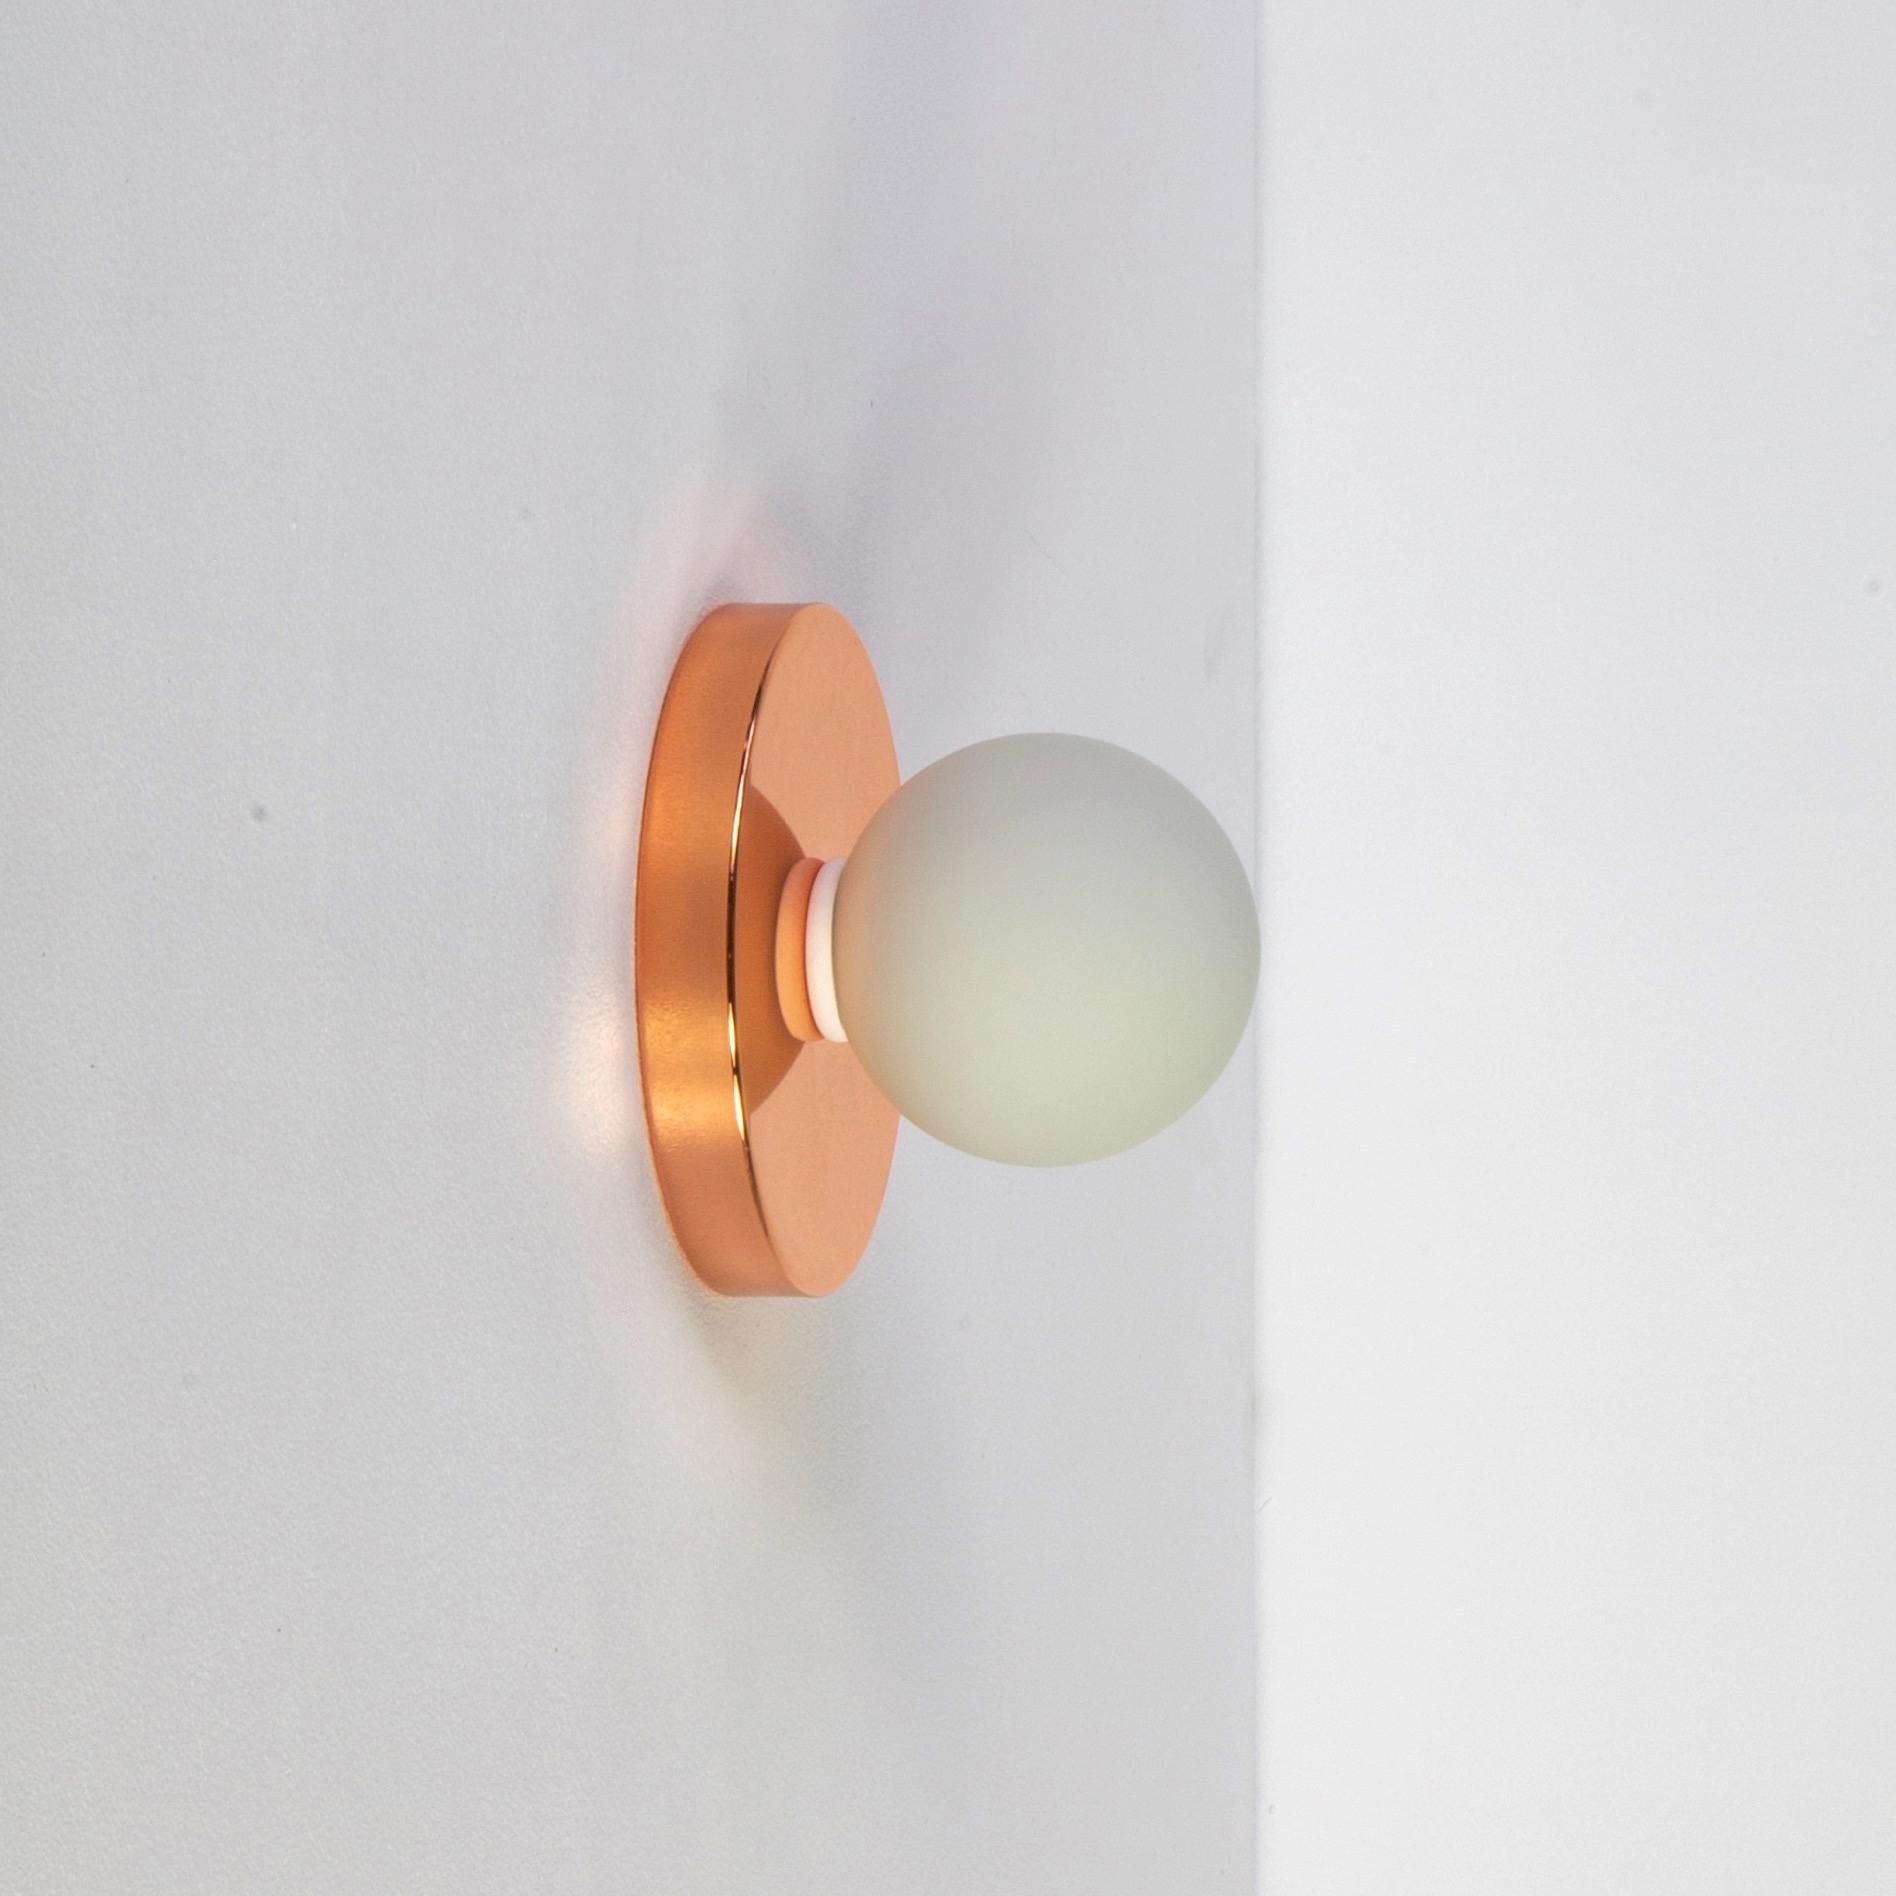 This listing is for 1x Globe Sconce in copper designed and manufactured by Research.Lighting.

Materials: Brass, Steel & Glass
Finish: Copper
Electronics: 1x G9 Socket, 1x 4.5 Watt LED Bulb (included), 450 Lumens
ADA Compliant. UL Listed. Made in